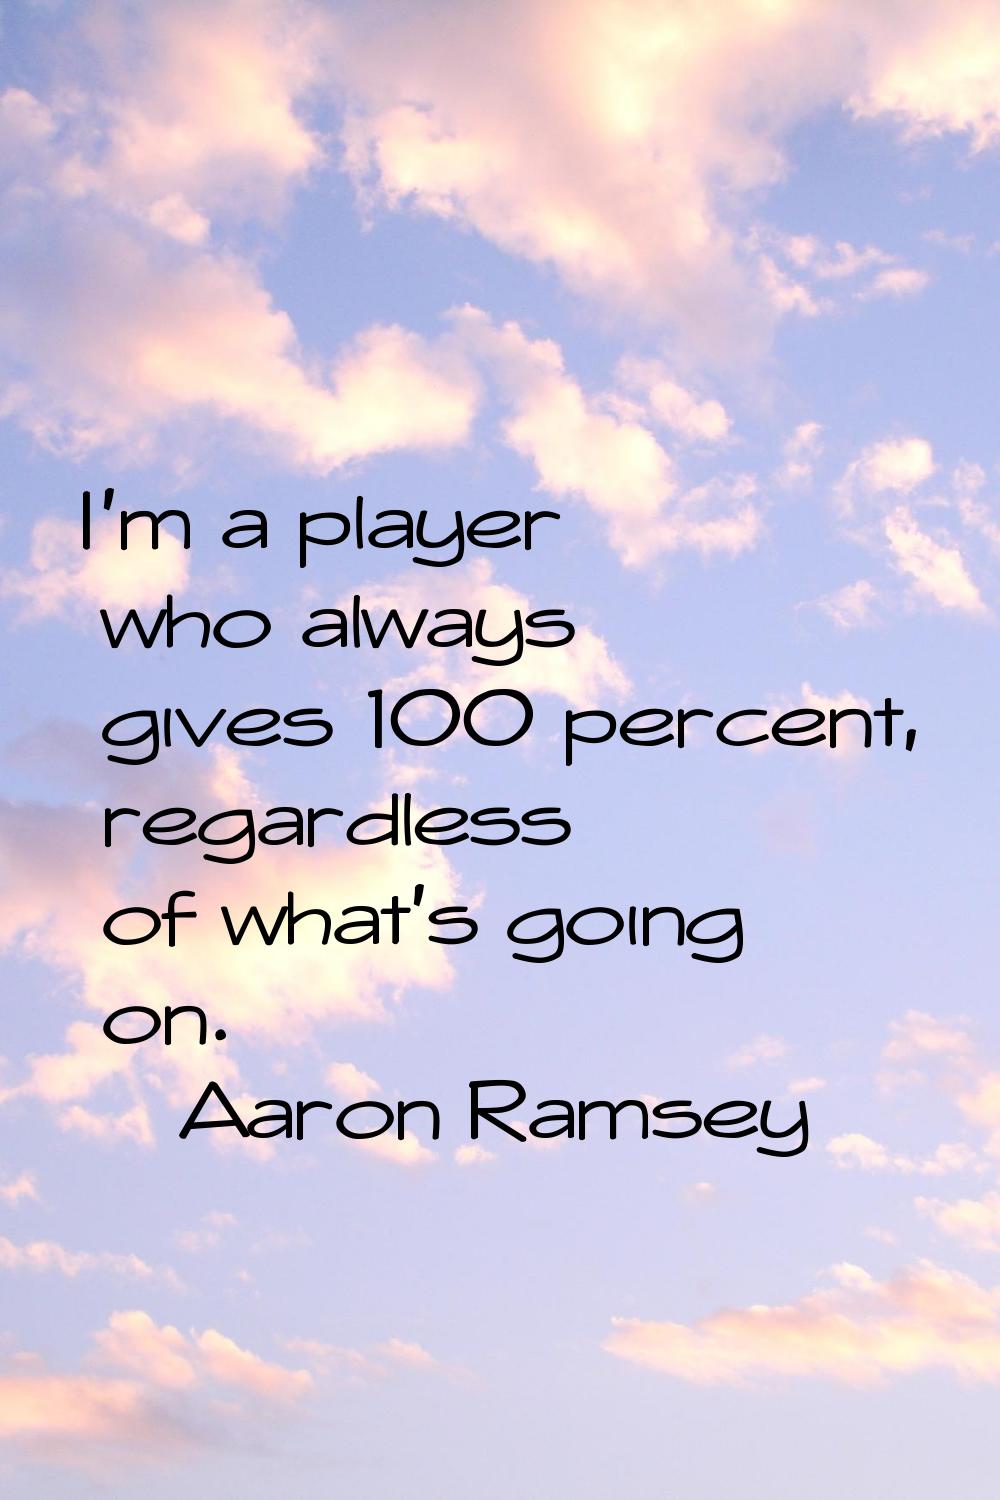 I'm a player who always gives 100 percent, regardless of what's going on.